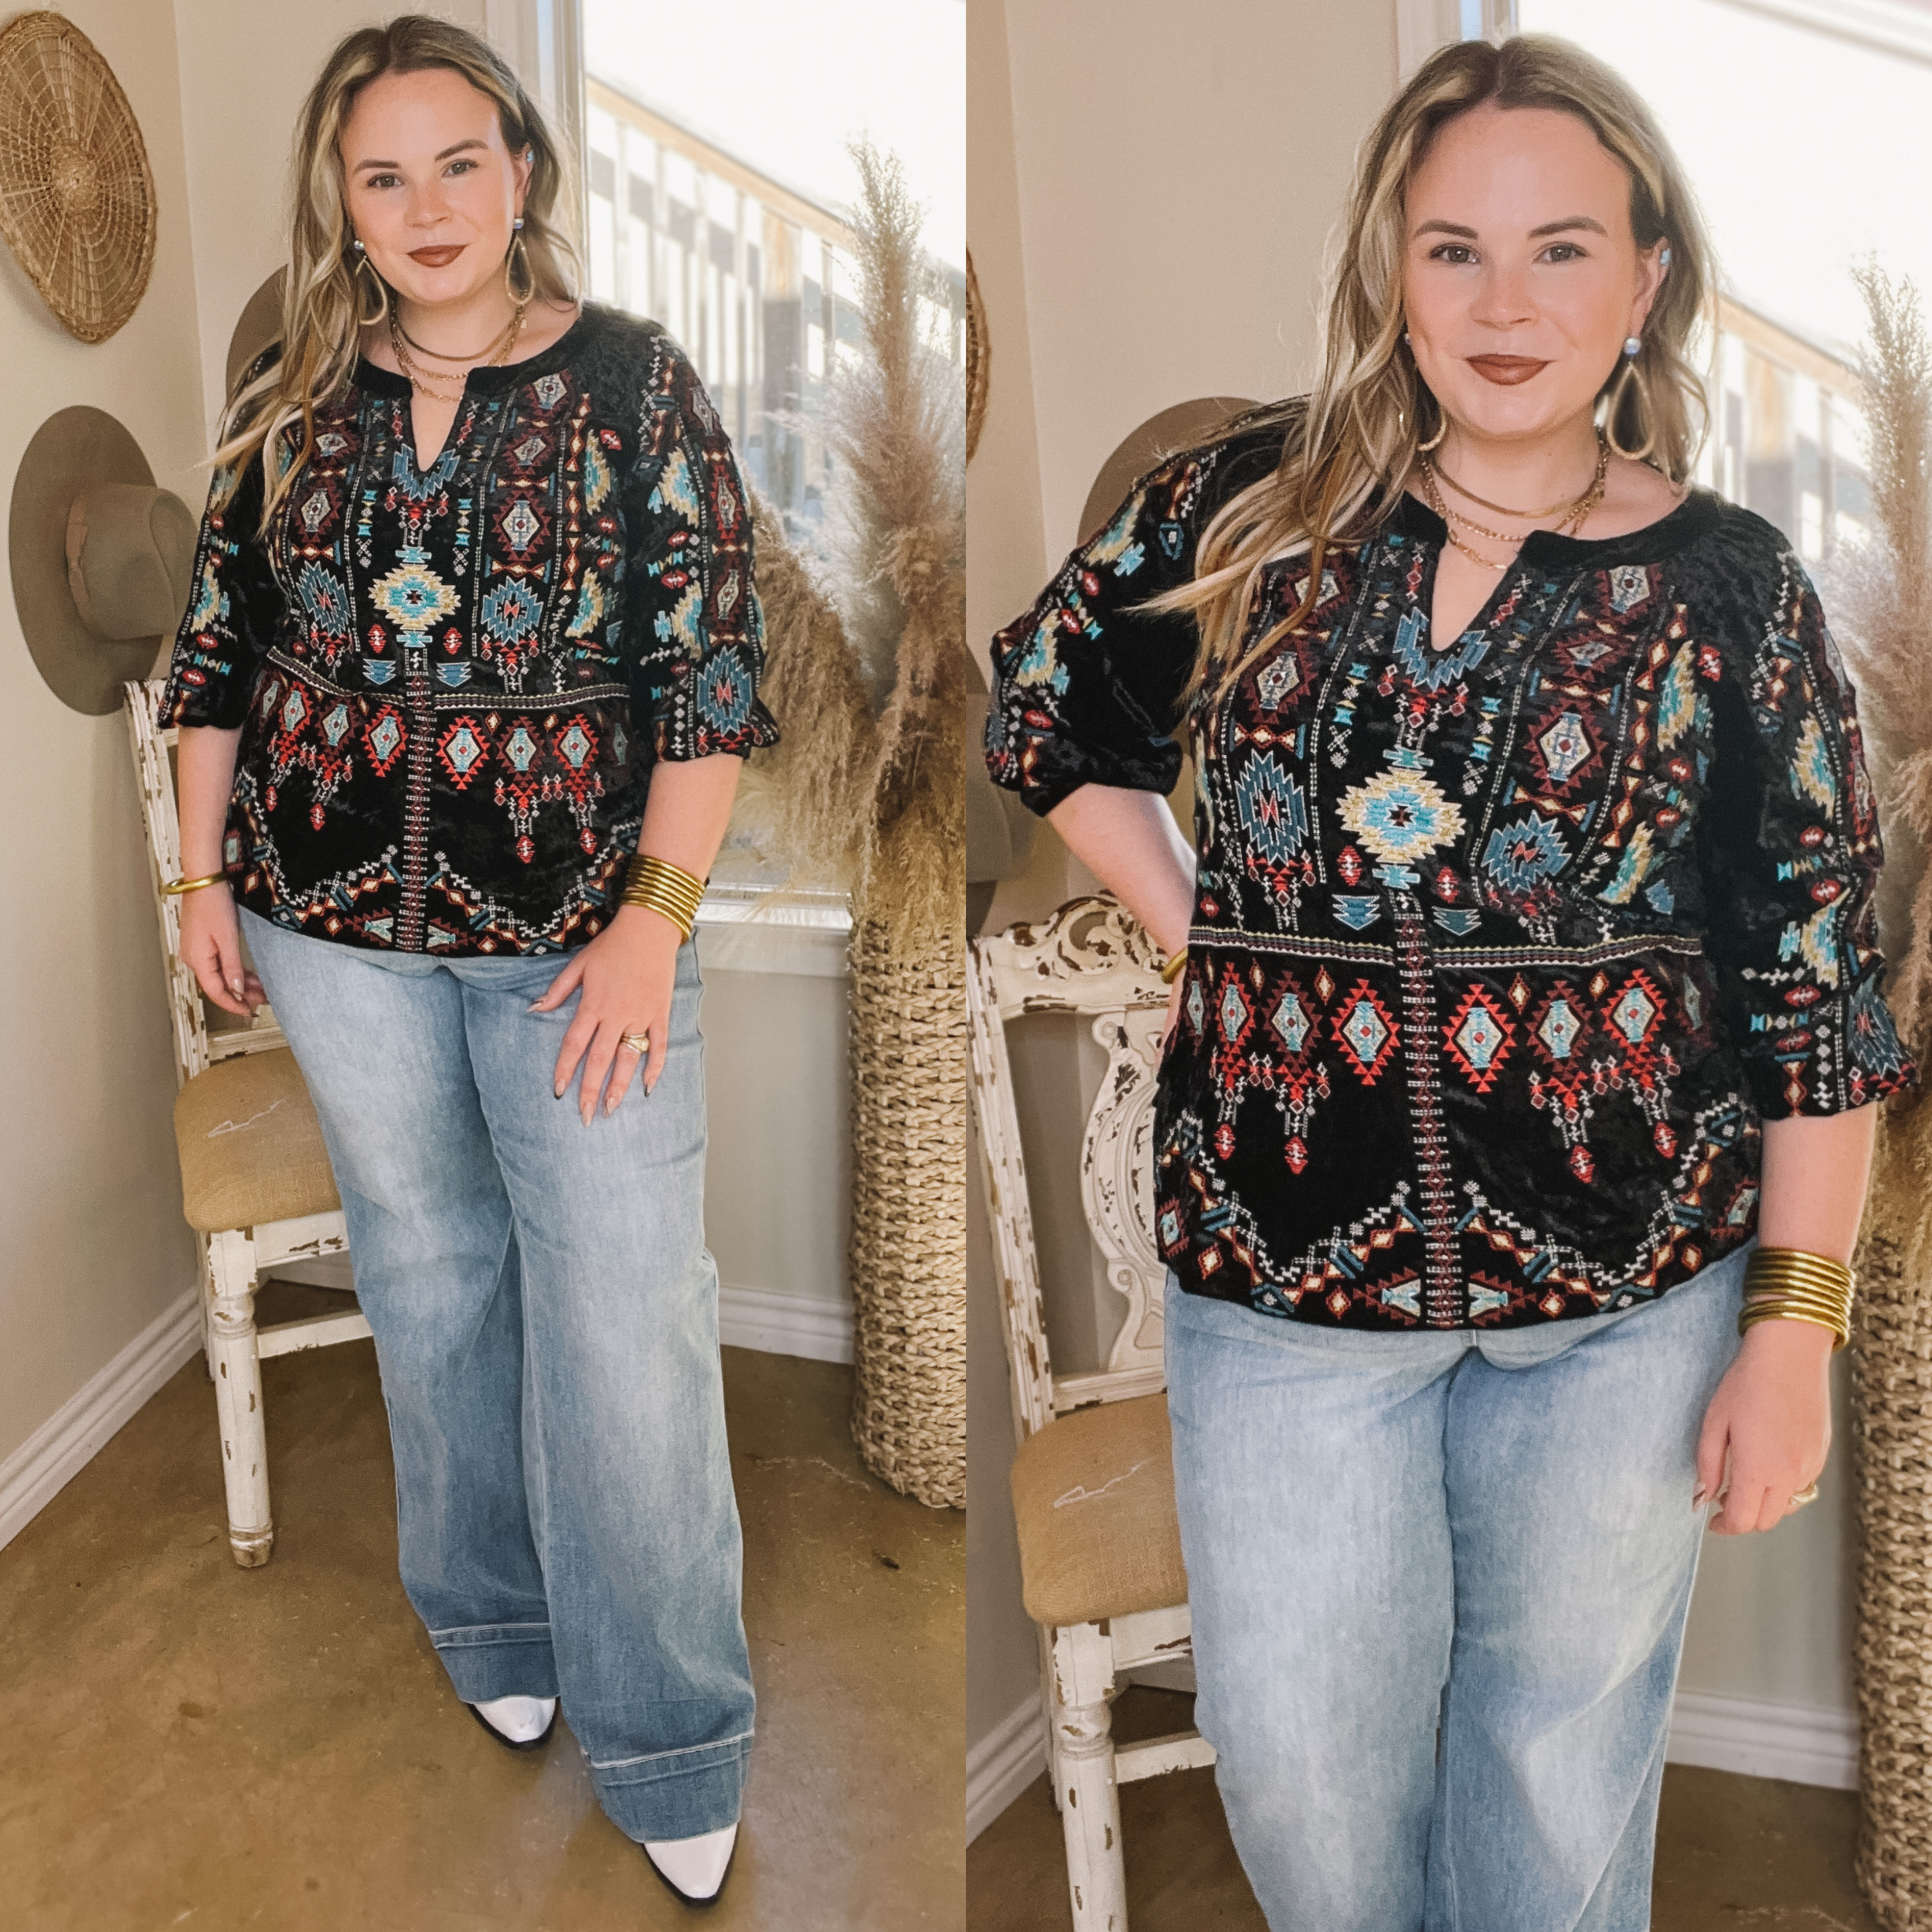 Model is wearing a black embroidered velvet top with 3/4 length sleeves. The embroidery on this top includes the colors red, blue, maroon, yellow and white. Model has this top paired with light wash trouser jeans, white booties, and gold jewelry. Background is hues of white and brown. 